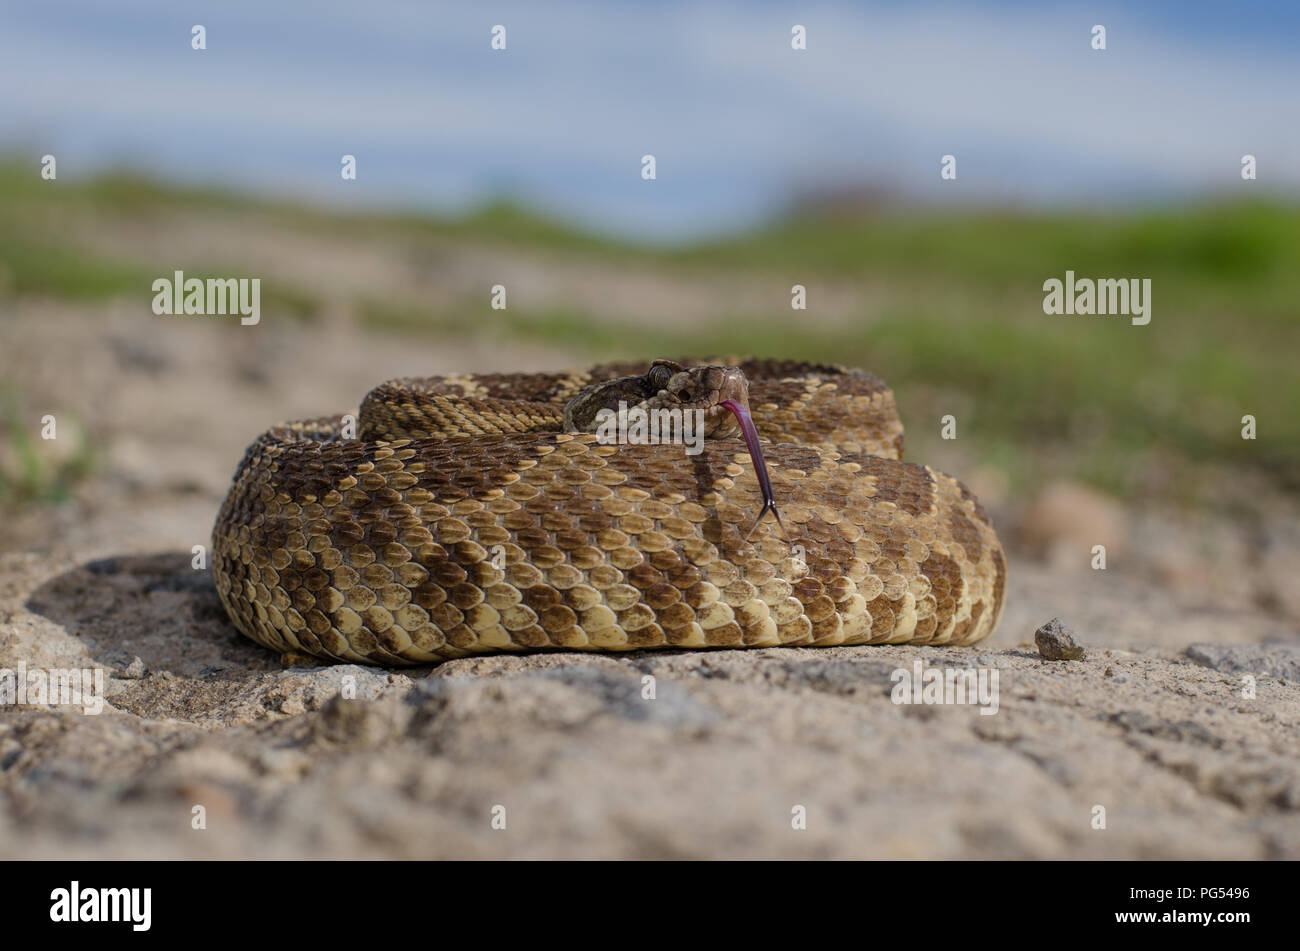 Rattlesnake flicking its tongue in defensive position. Stock Photo